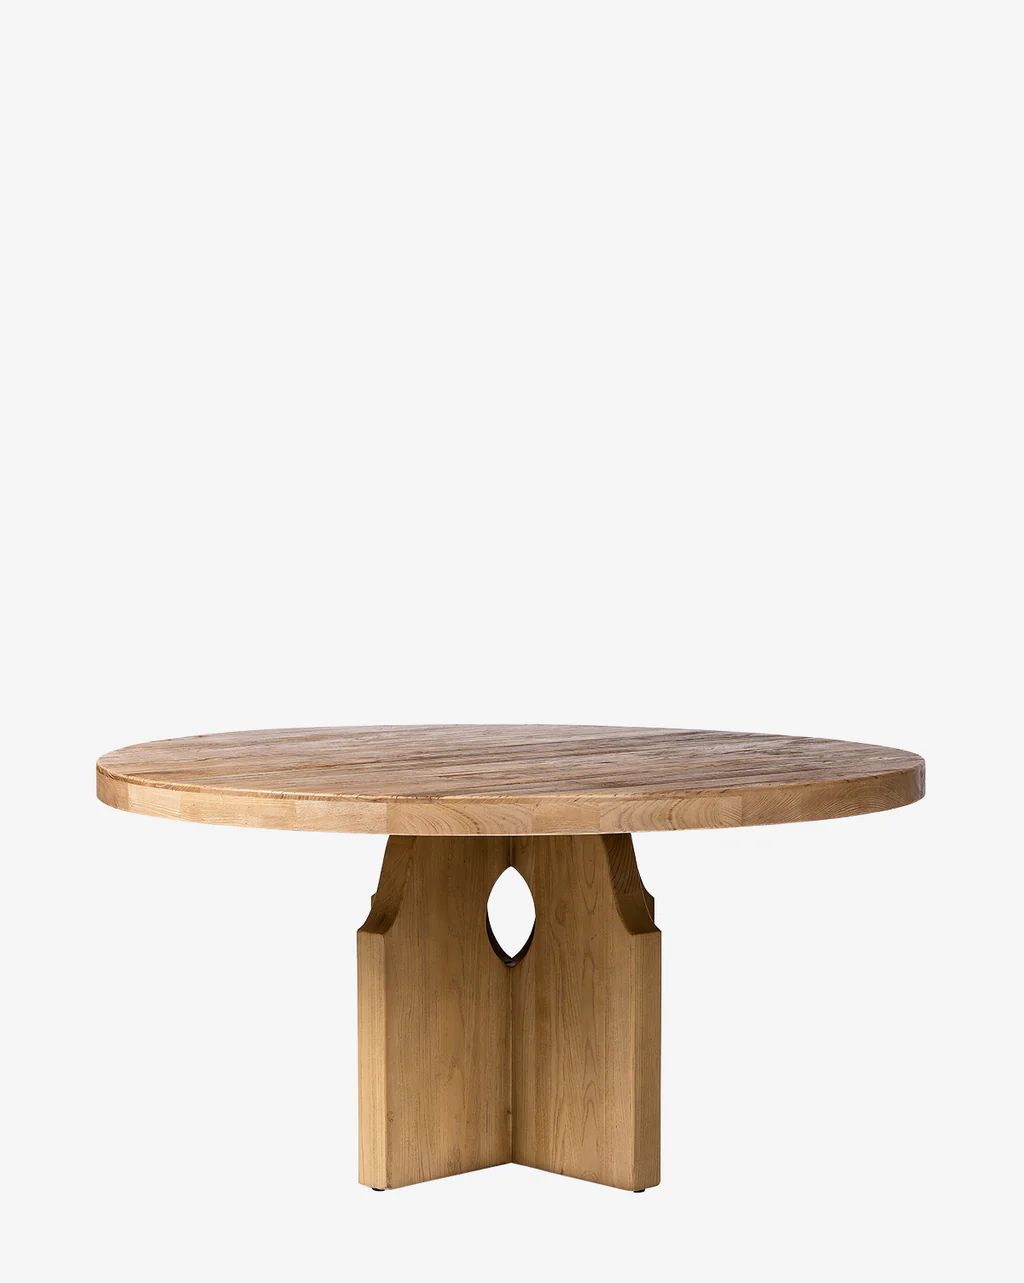 Bayard Round Dining Table | McGee & Co.